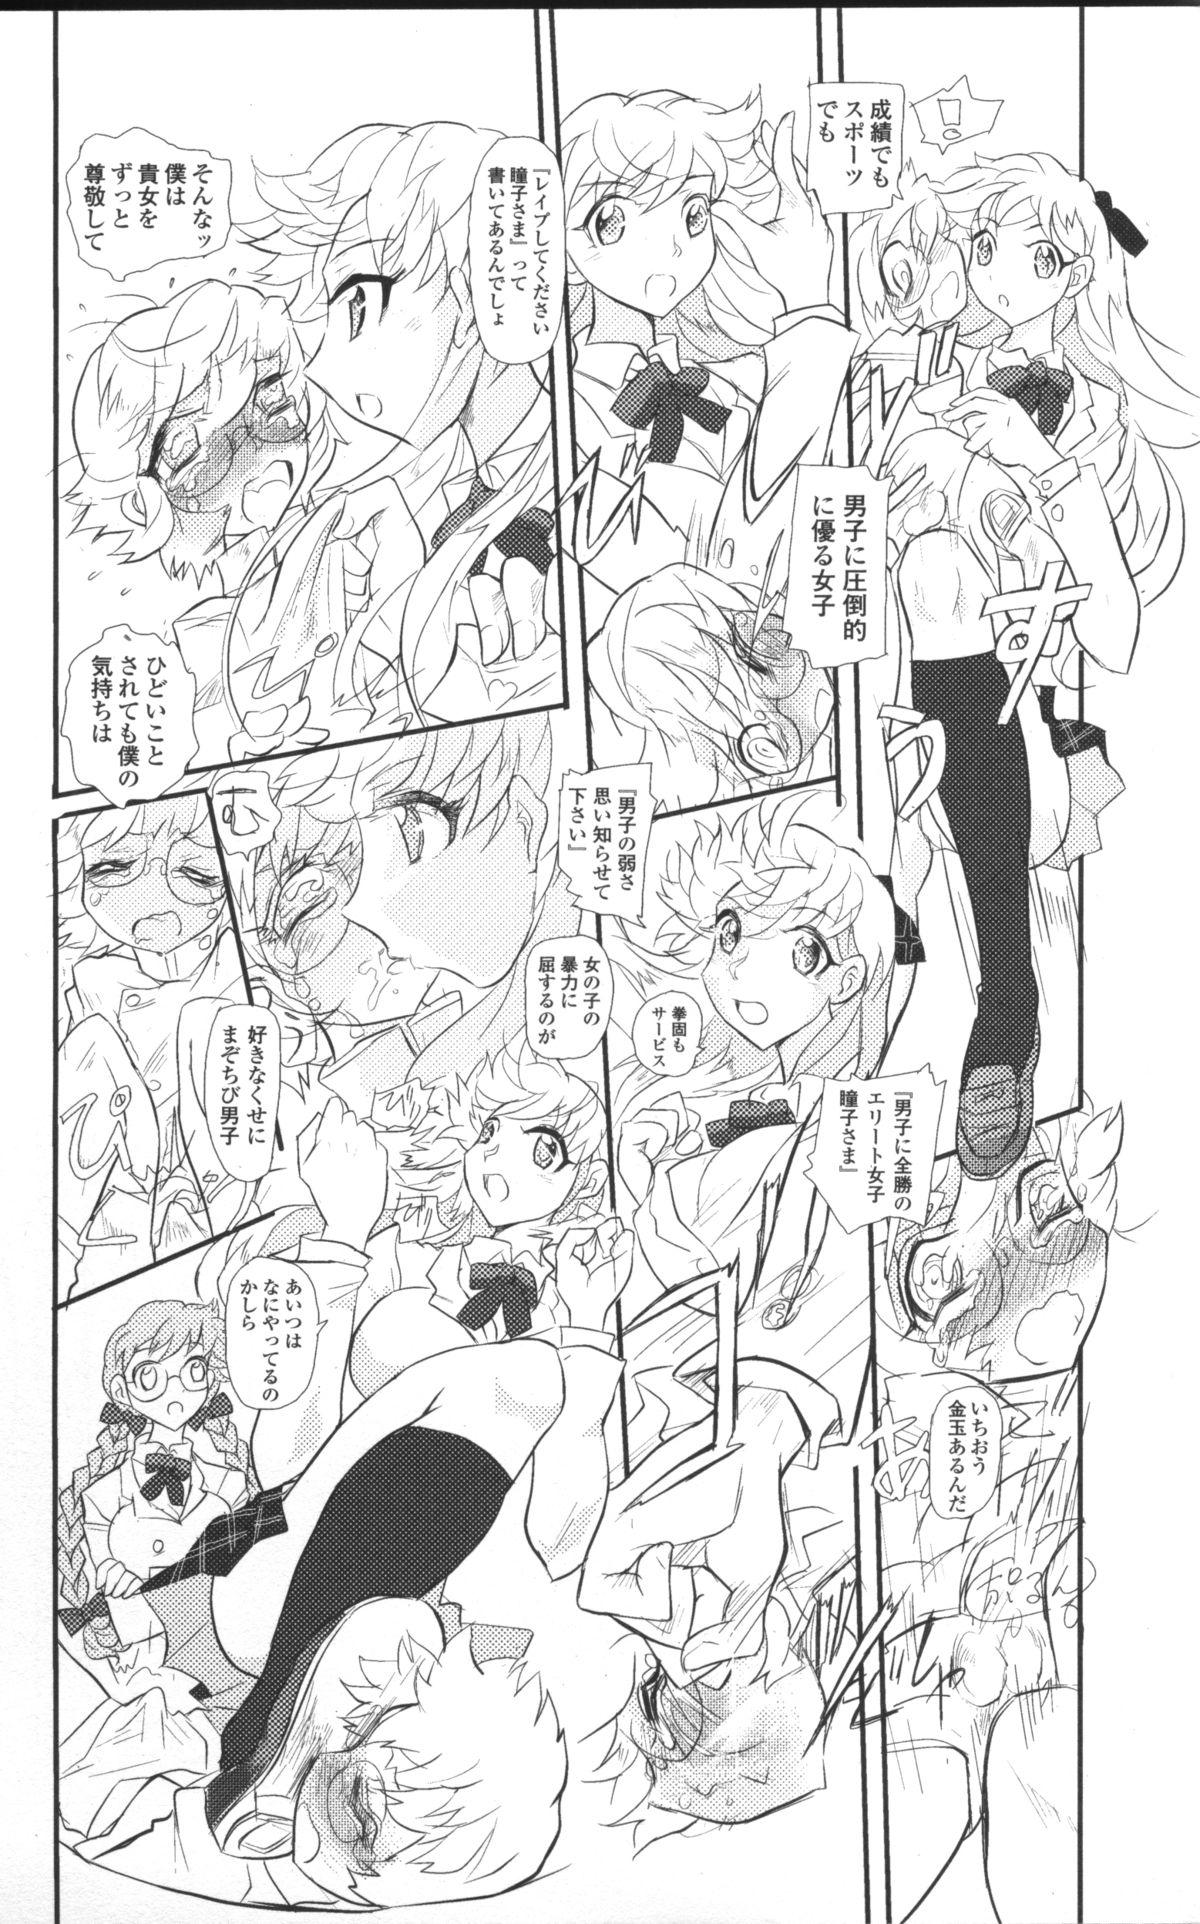 Camwhore Graduation: A School Story About Overwhelmingly Superior Girls Desperate - Page 2